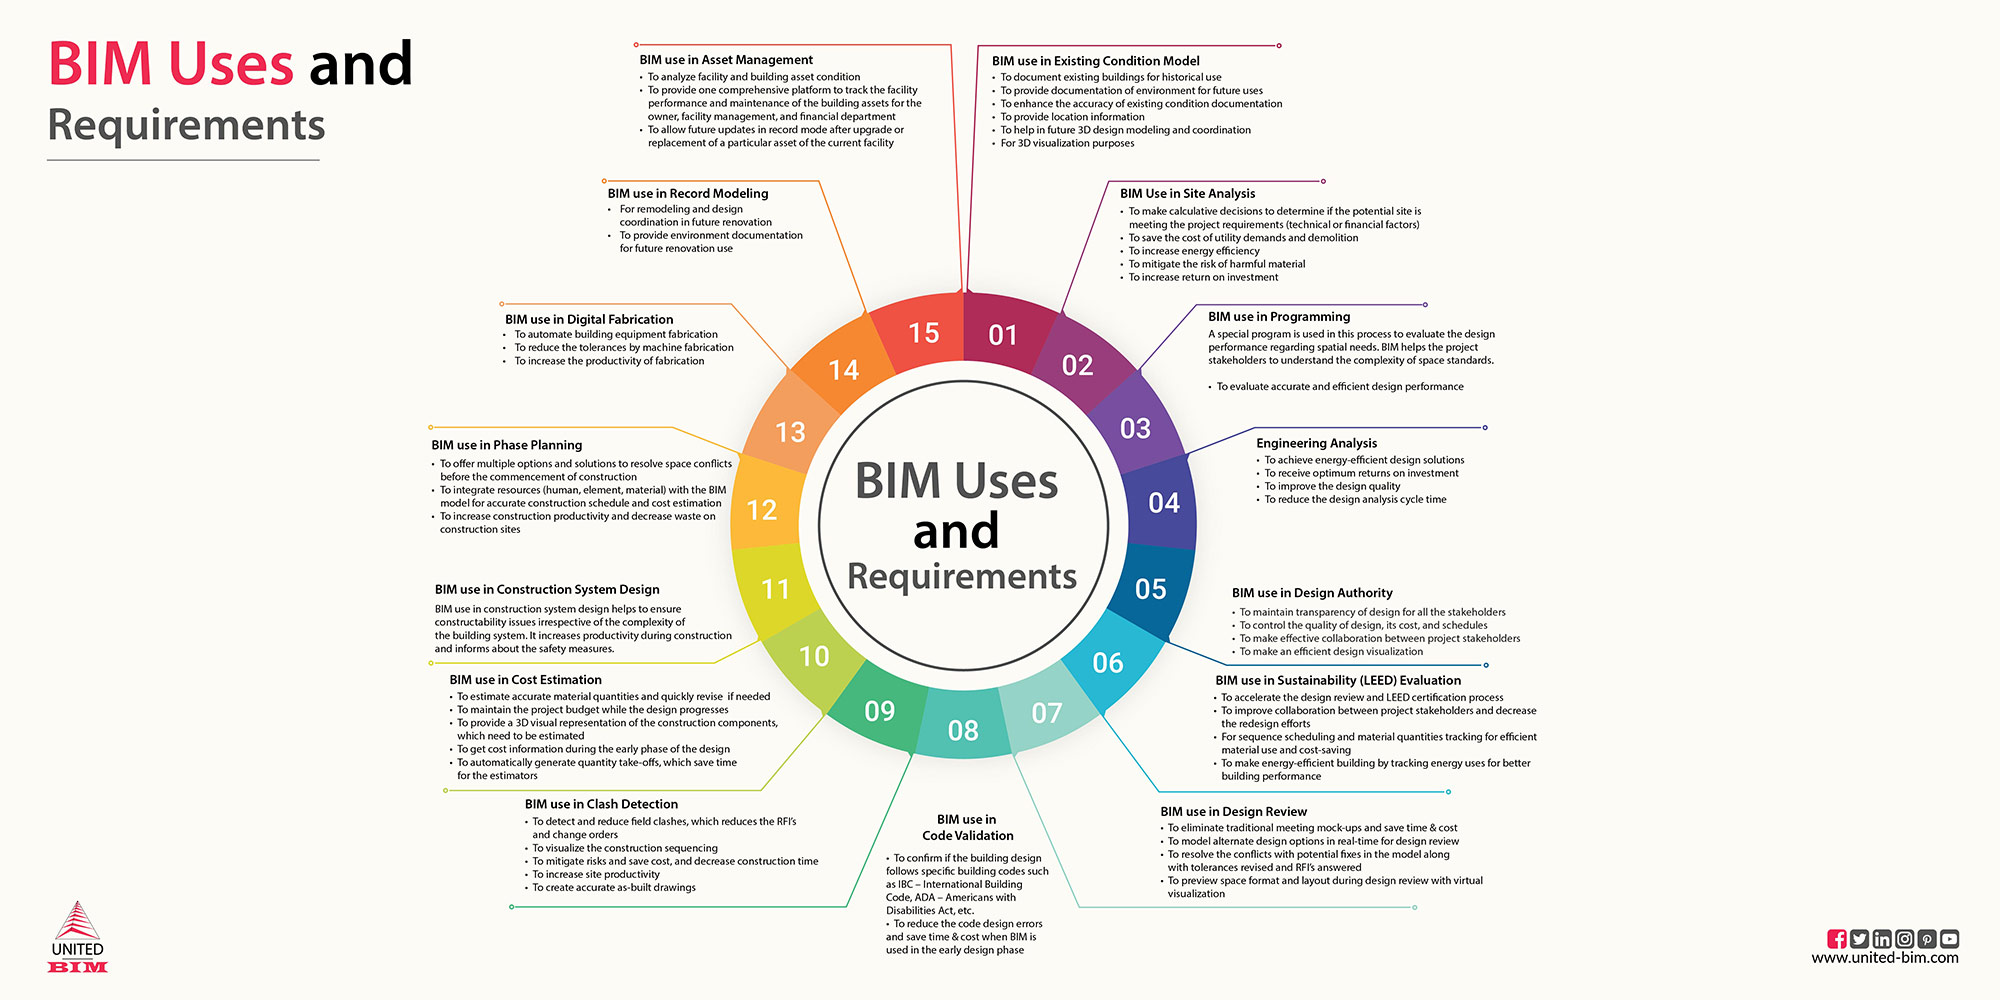 BIM uses and requirements_by DDC-NY